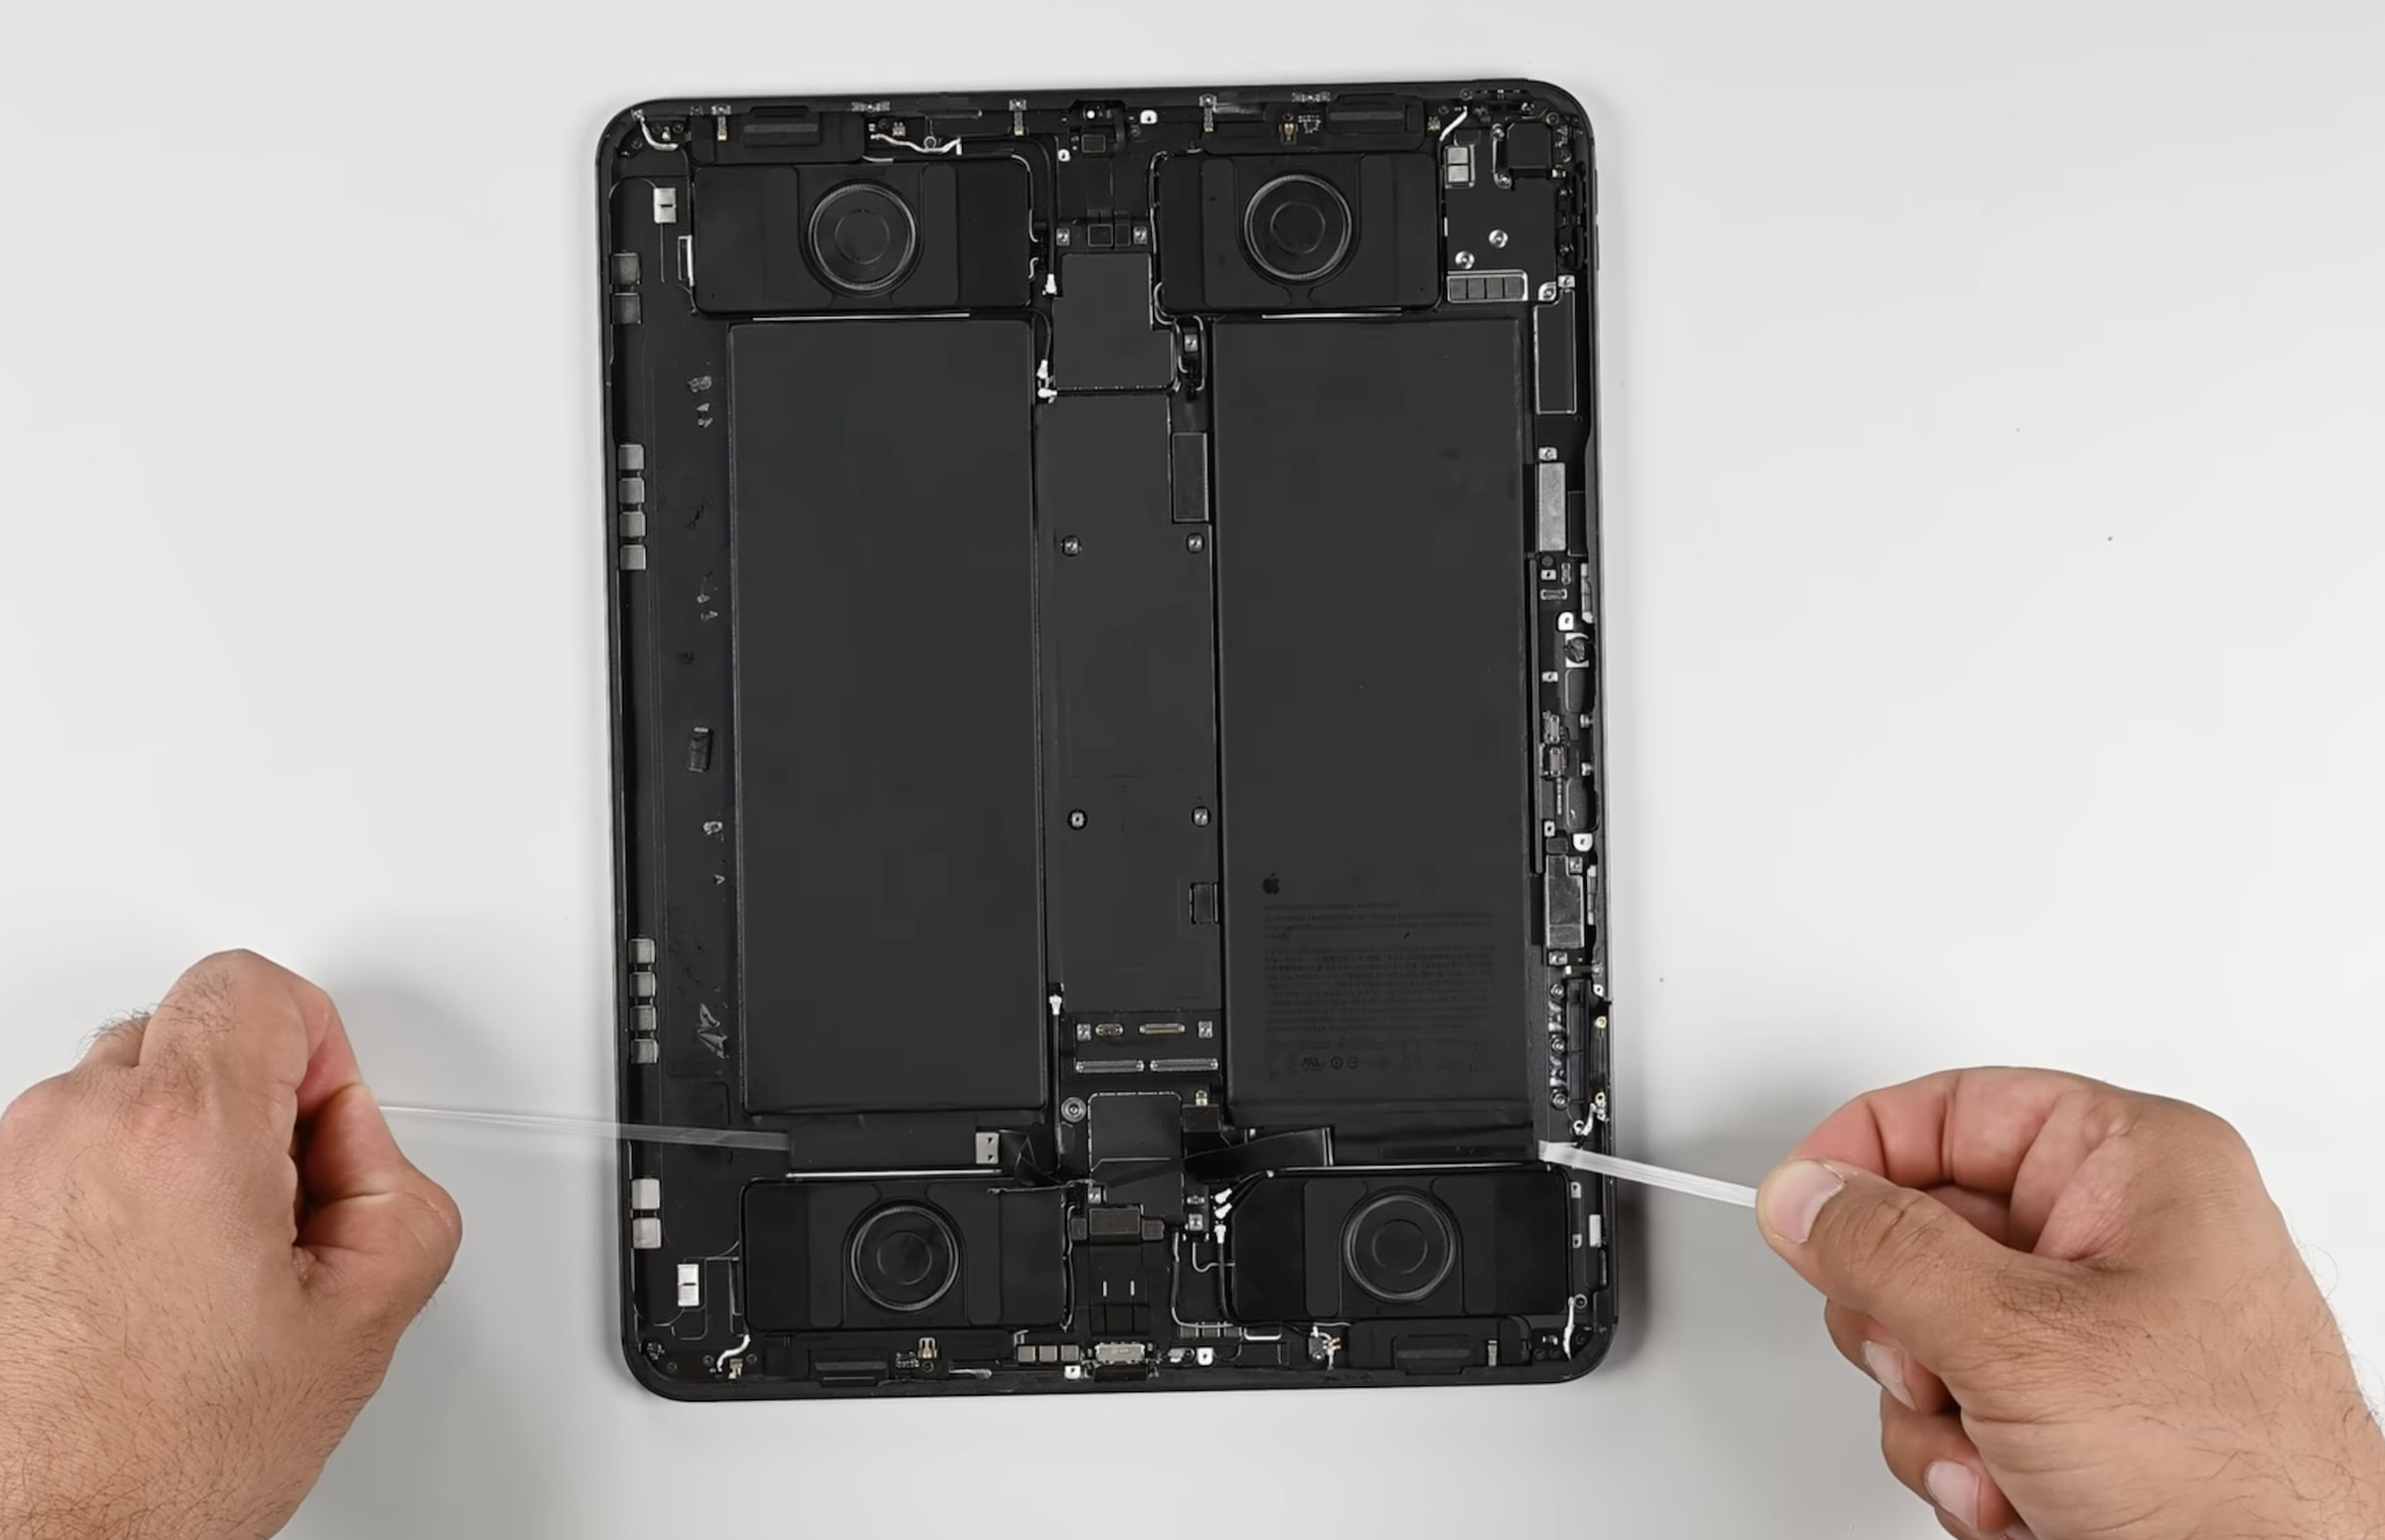 Screenshot of the iPad Pro with screen off and two hands pulling at pull-tabs on either side near the bottom.